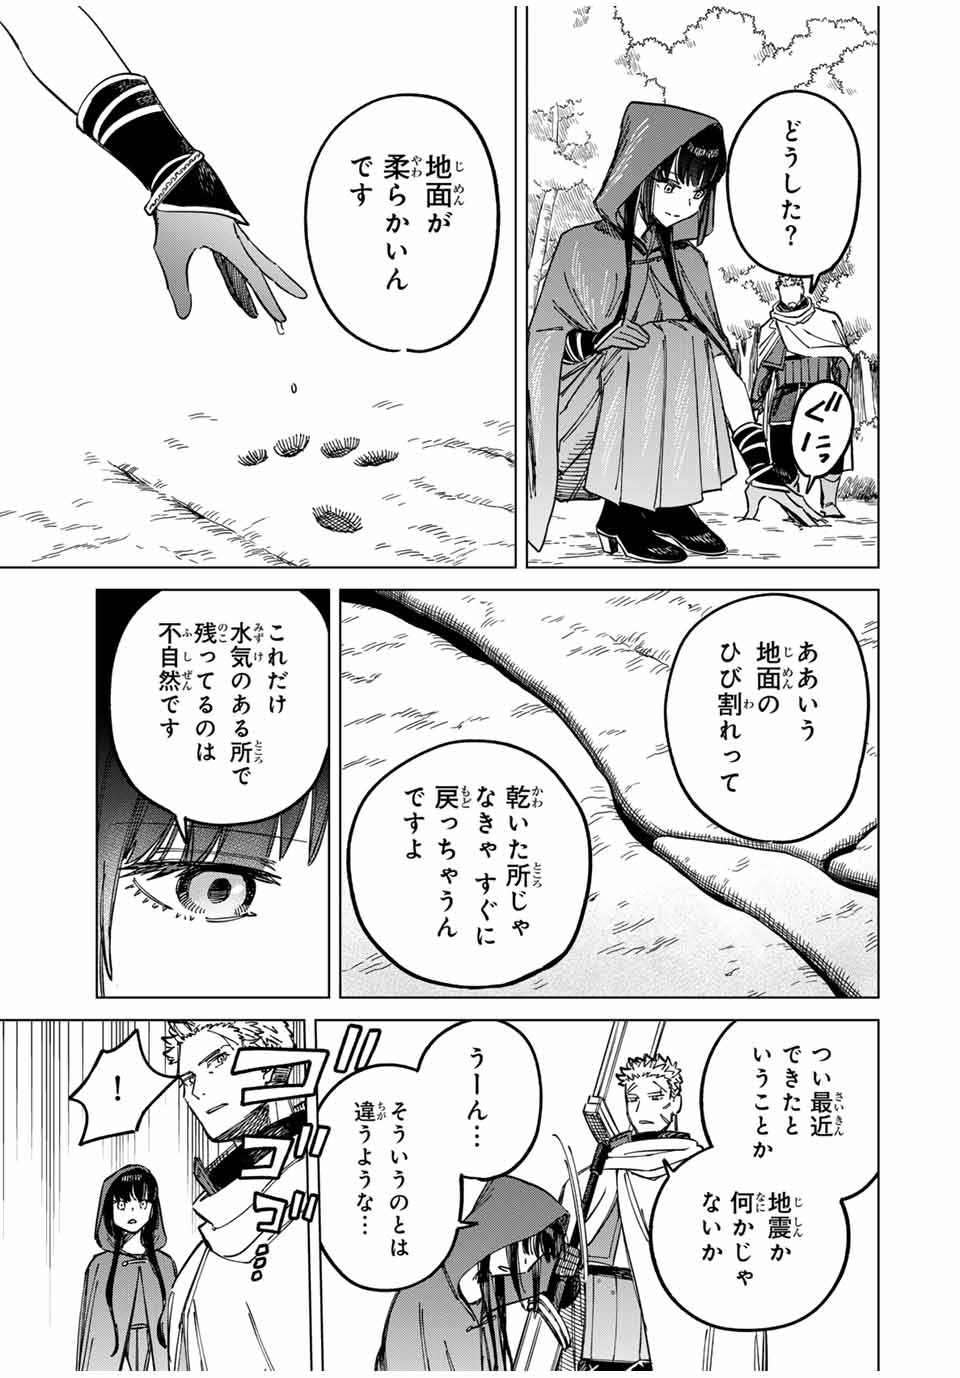 Witch and Mercenary 魔女と傭兵 第2話 - Page 37